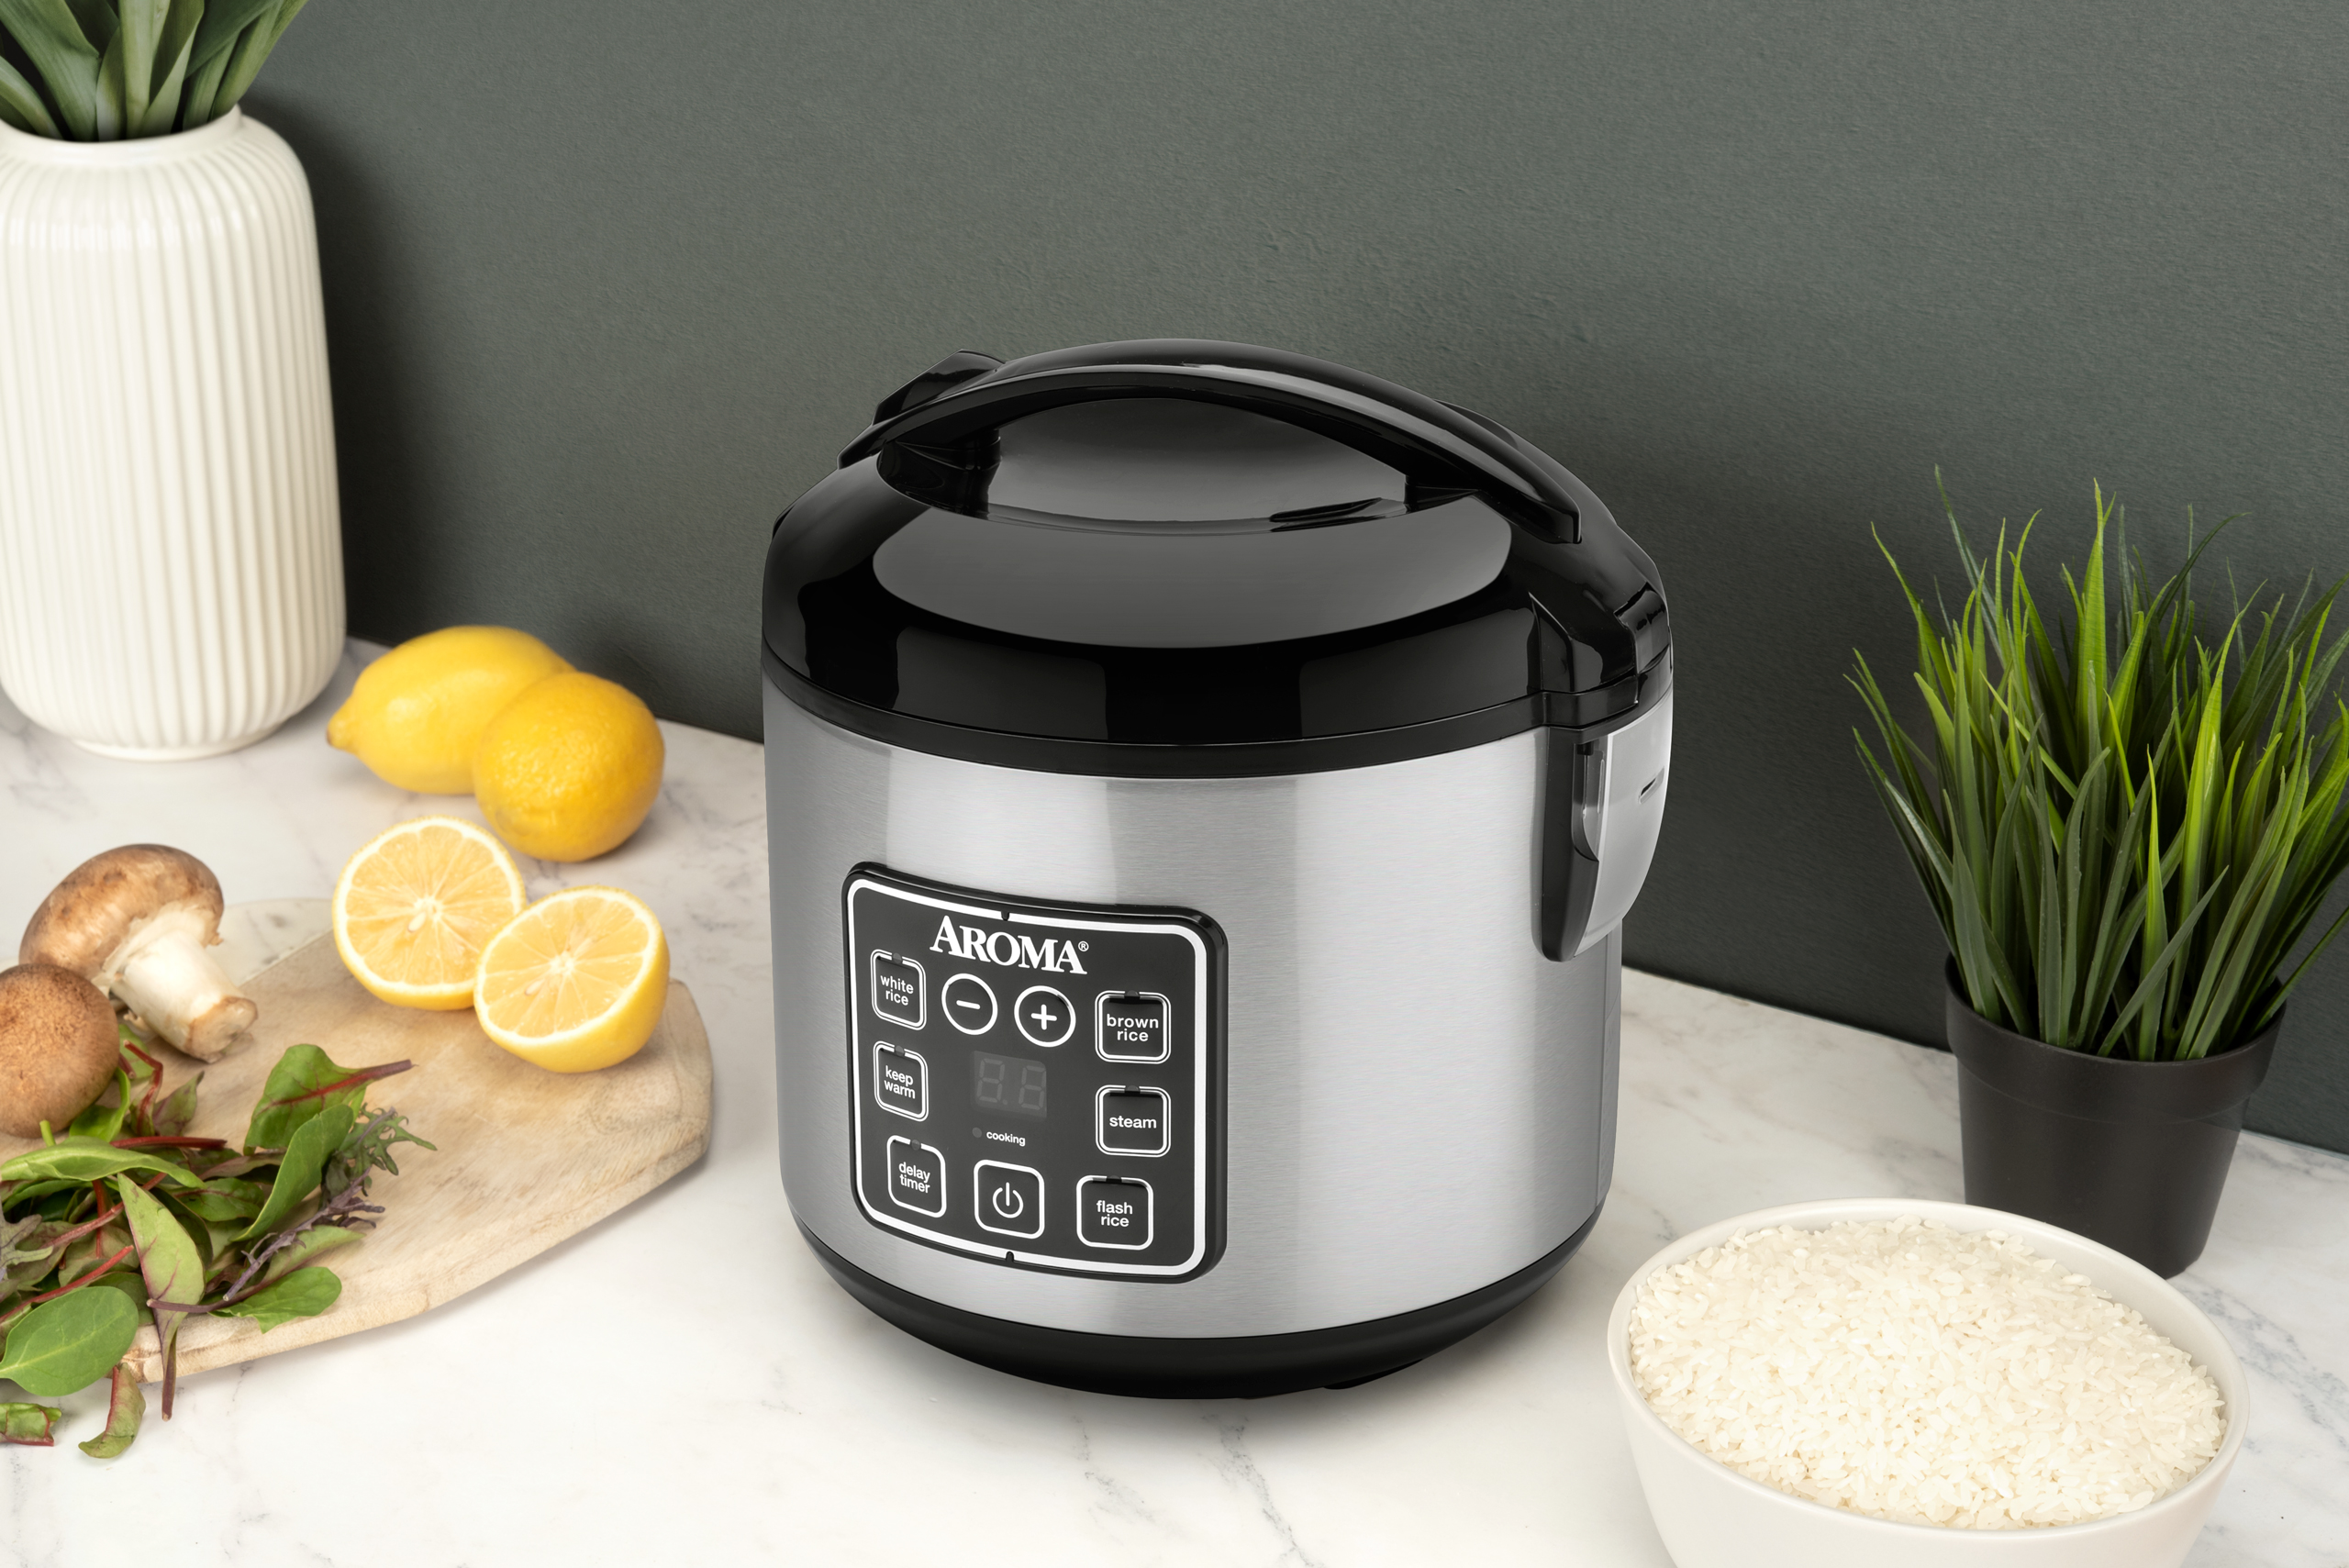 Aroma 8-Cup (Cooked) Rice & Grain Cooker, Steamer, New Bonded Granited Coating - image 5 of 10